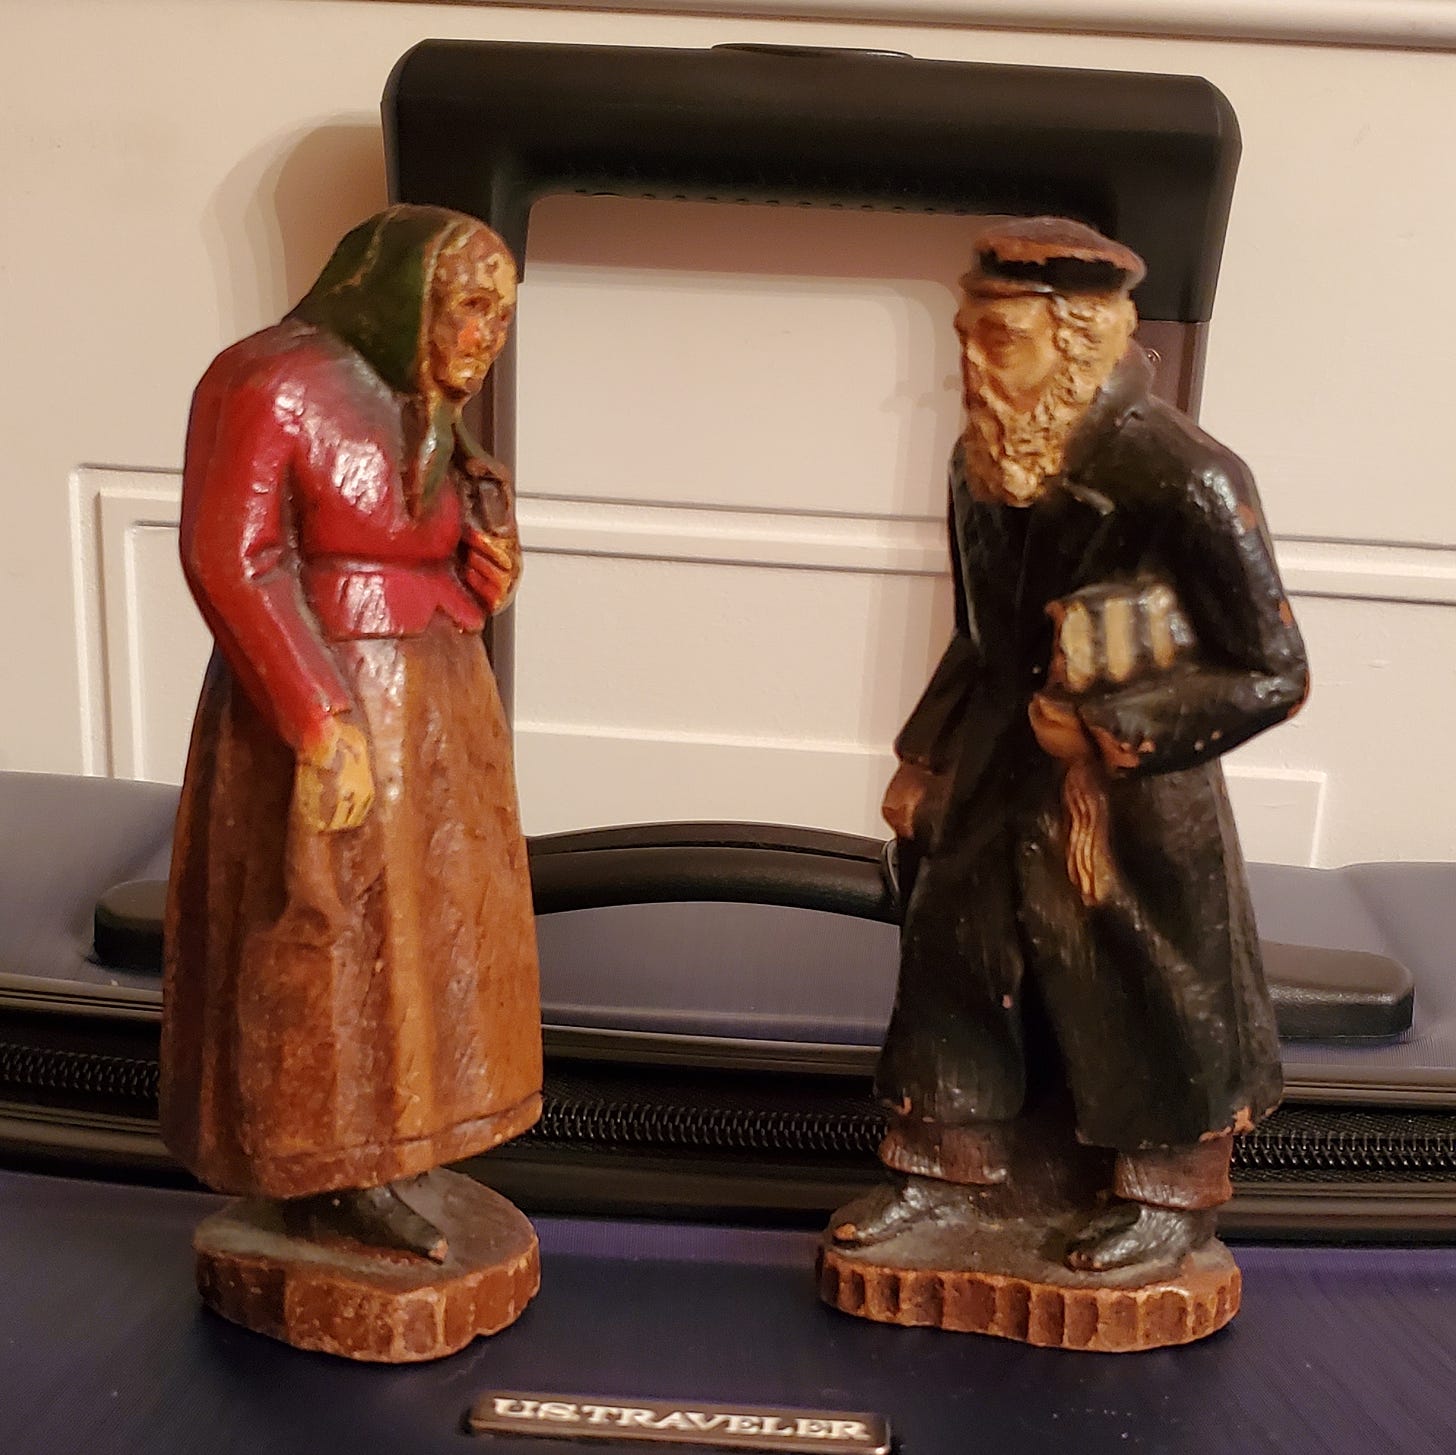 Figurines of an elderly Jewish couple in Eastern European dress perched on my suitcase.